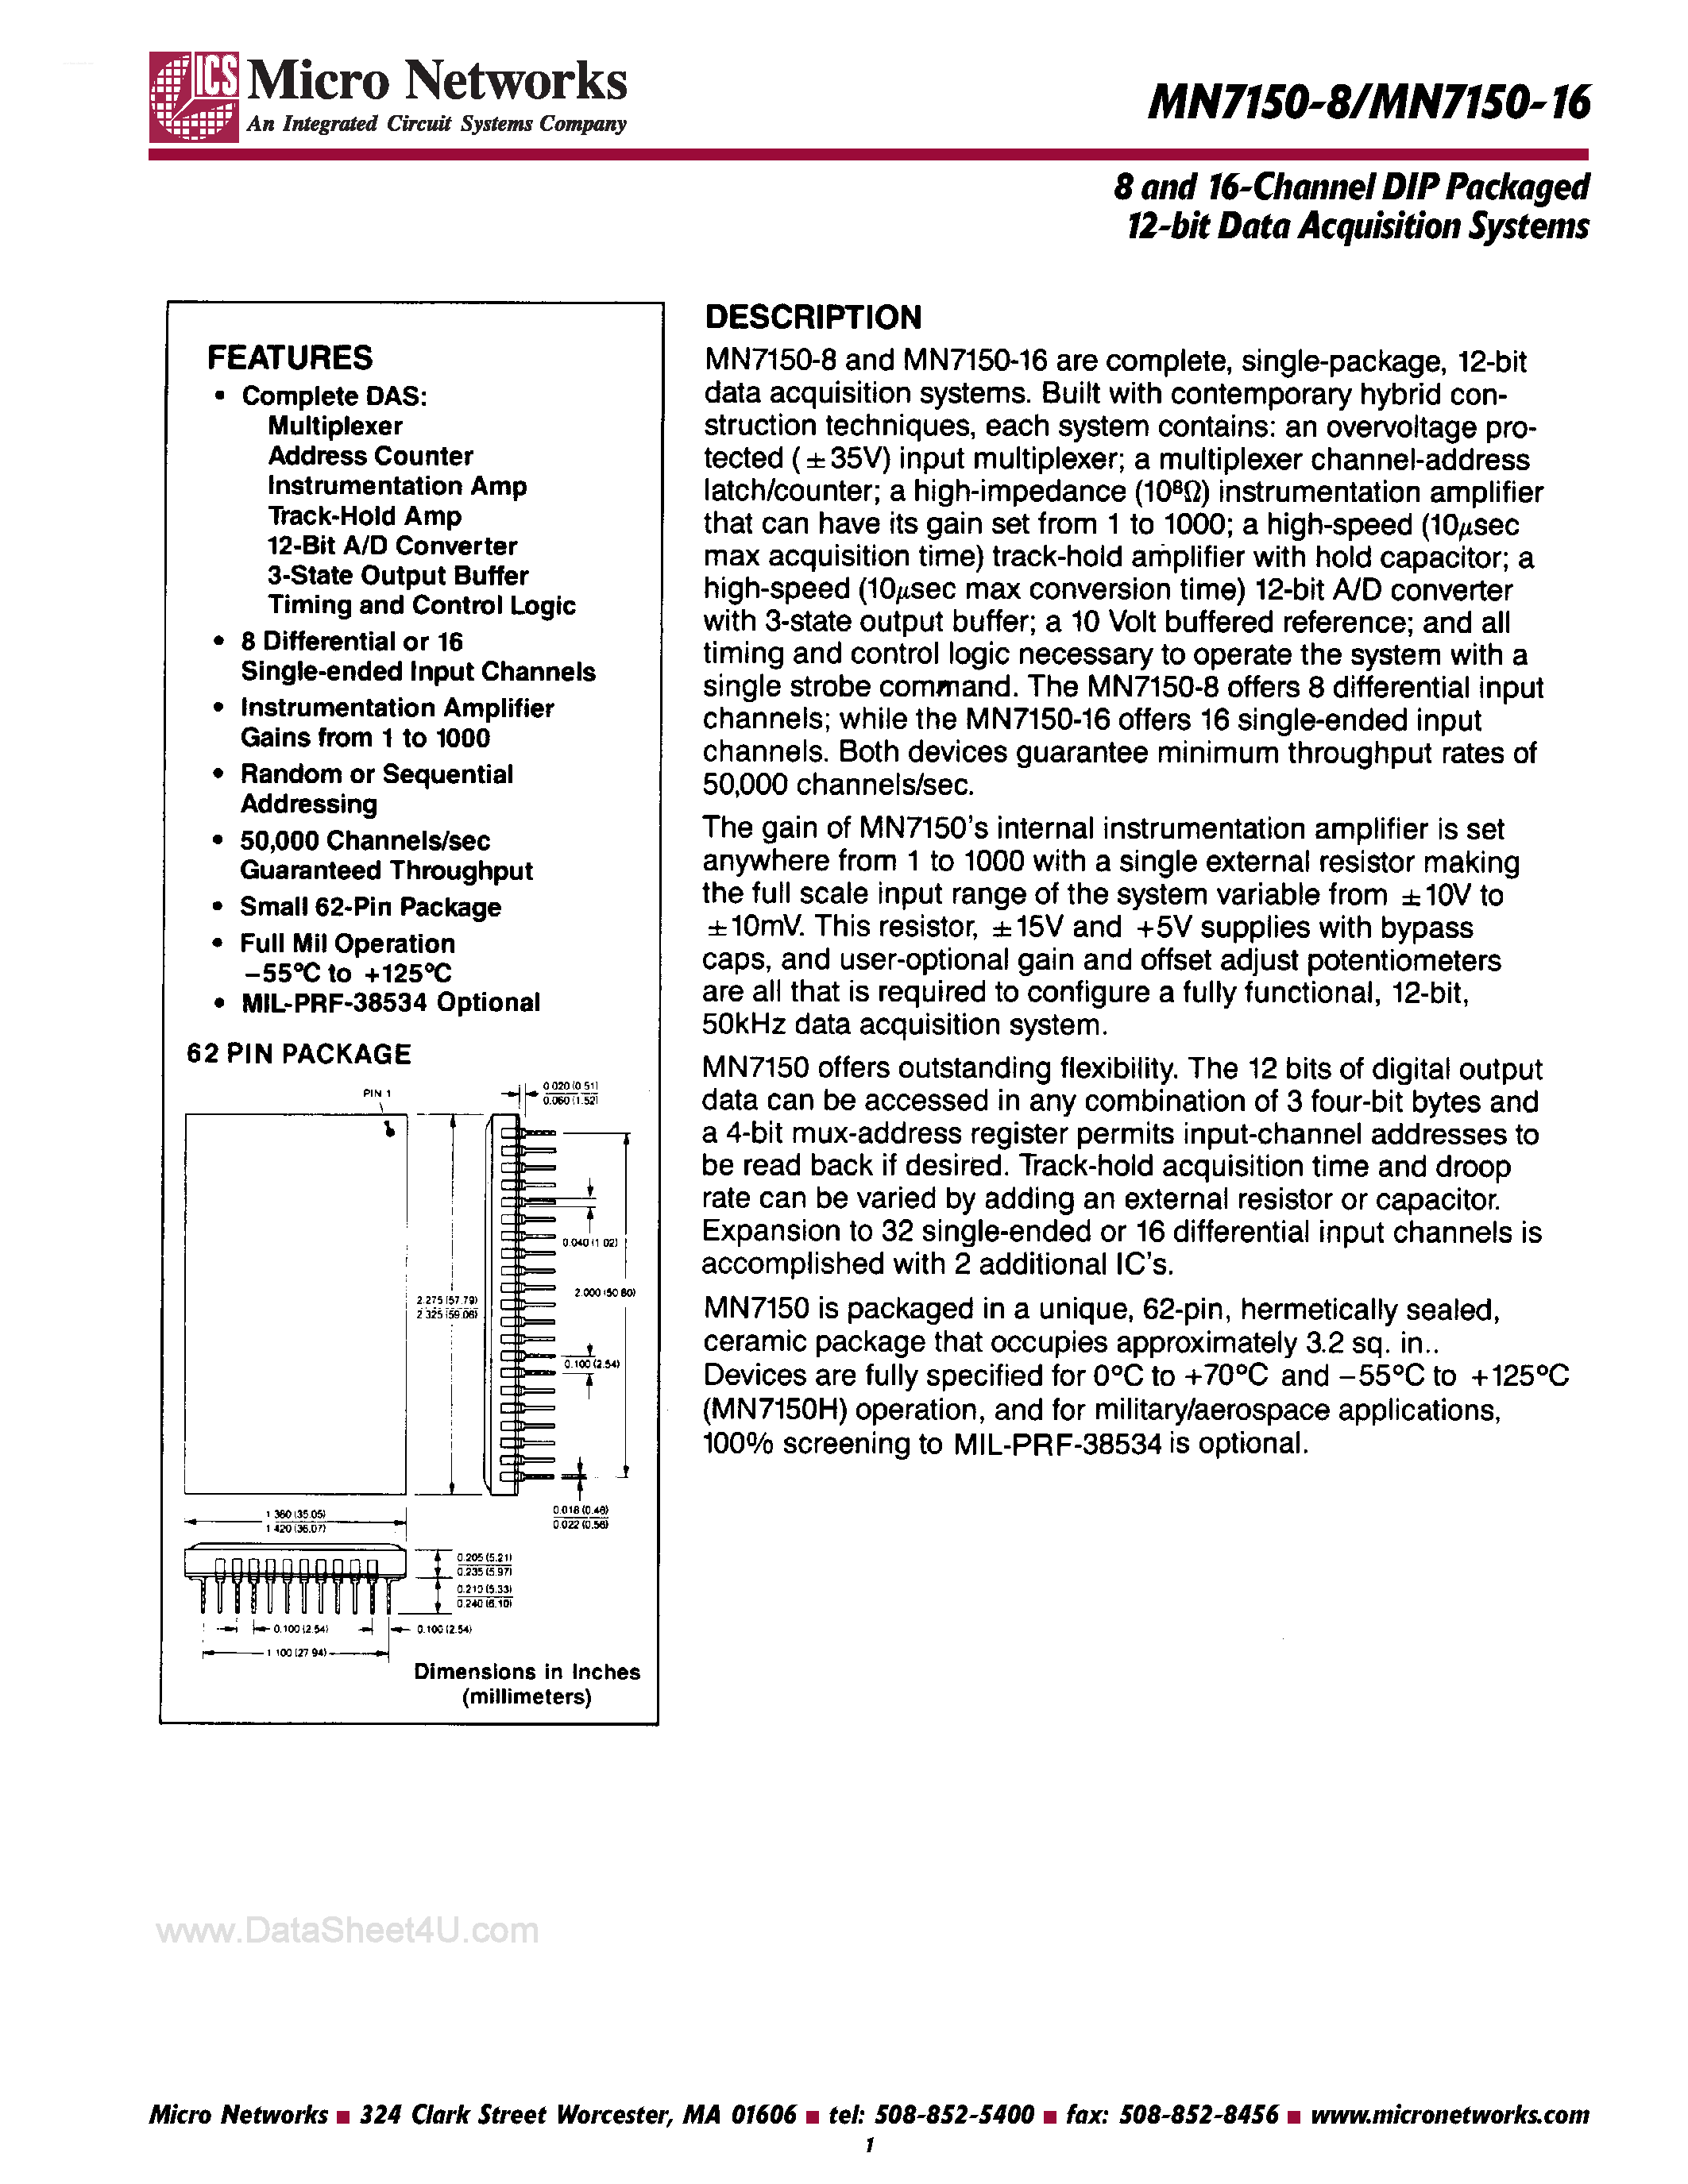 Datasheet MN7150-16 - (MN7150-8/-16) 8 and 16-Channel DIP Packaged 12-Bit Data Acquisition System page 1